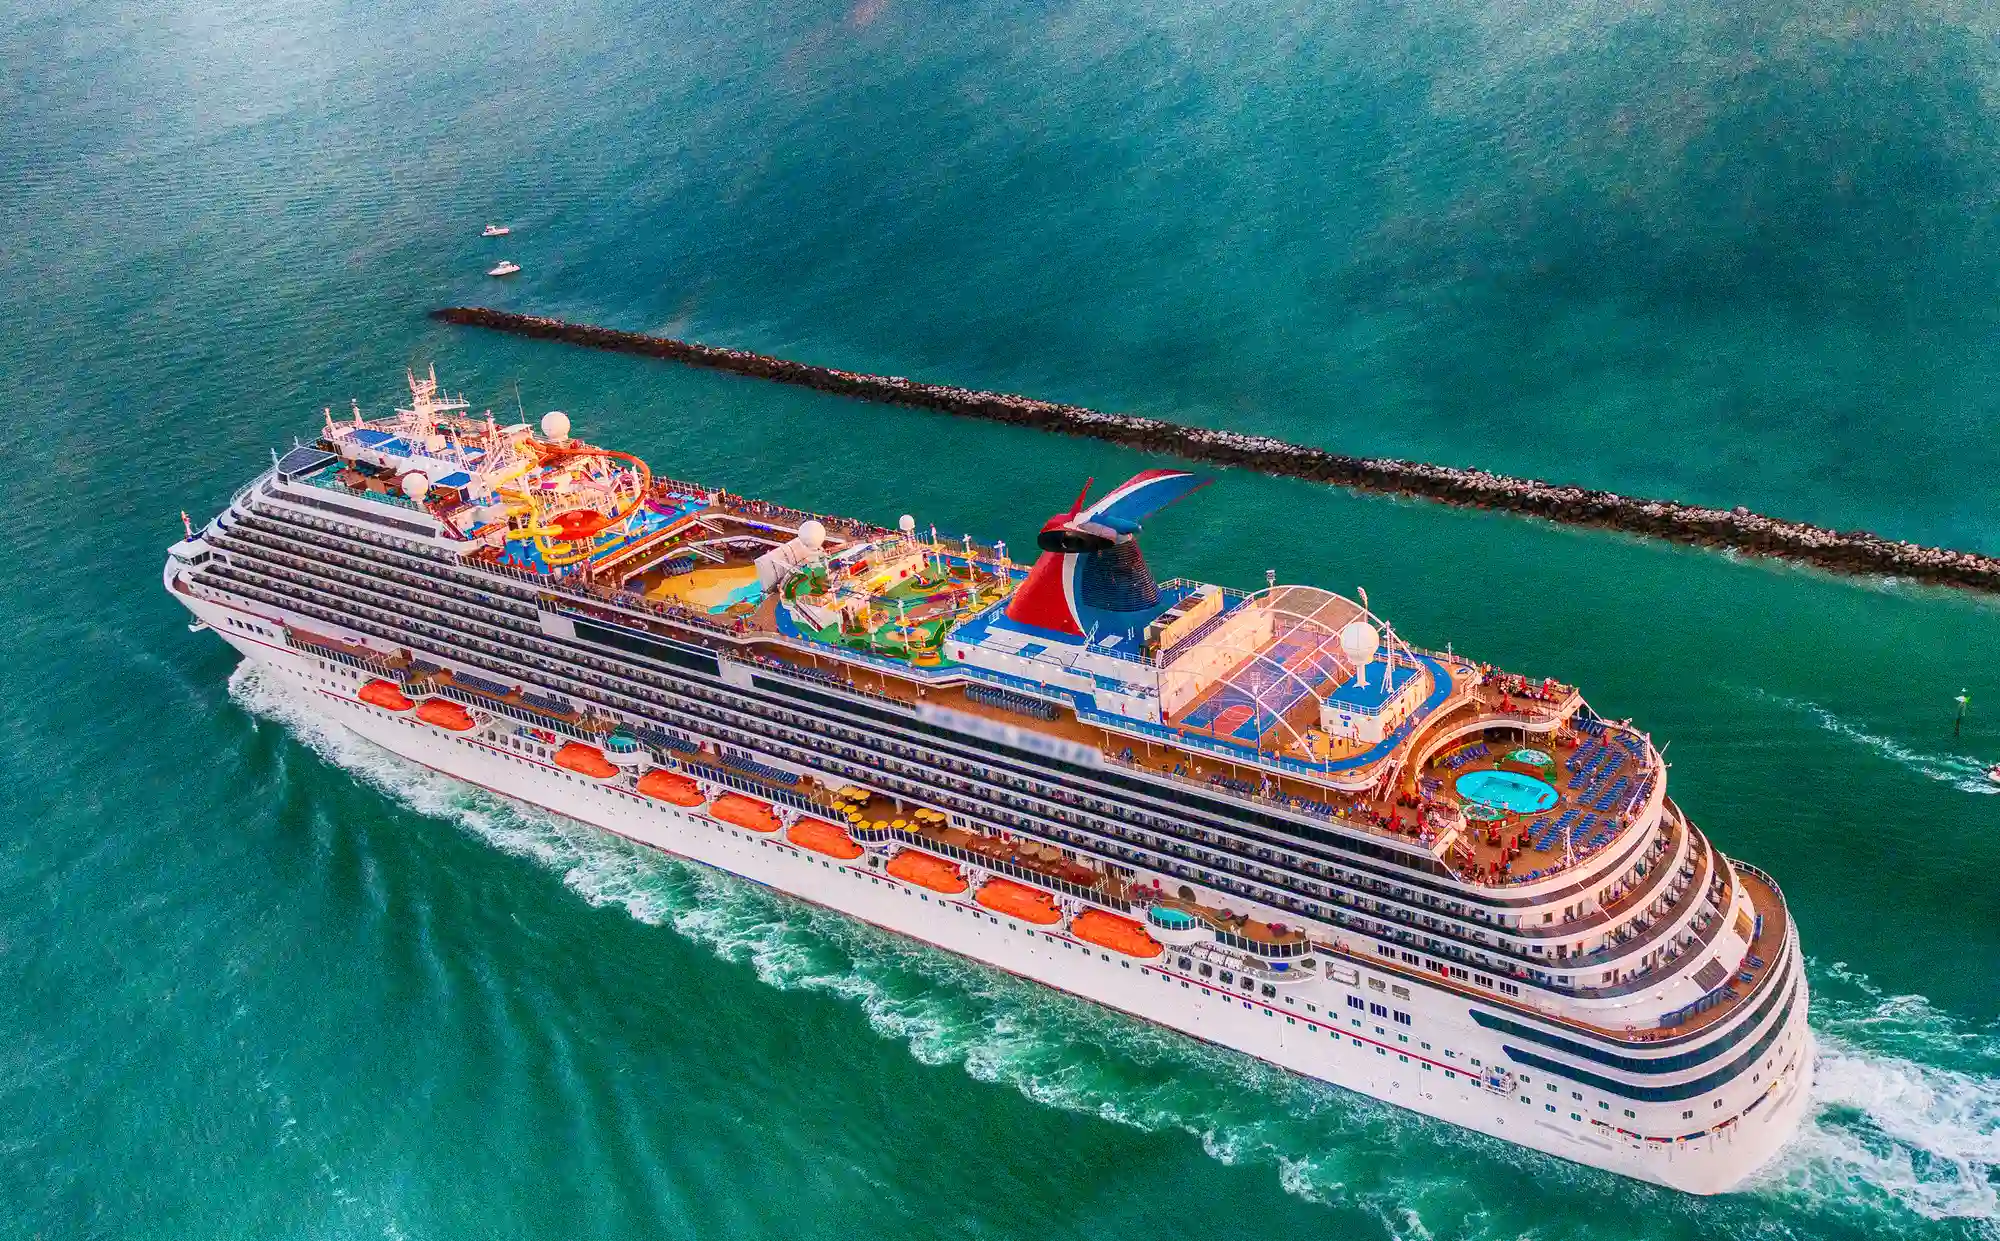 An aerial view of a large luxury Caribbean Cruise ship in the ocean.